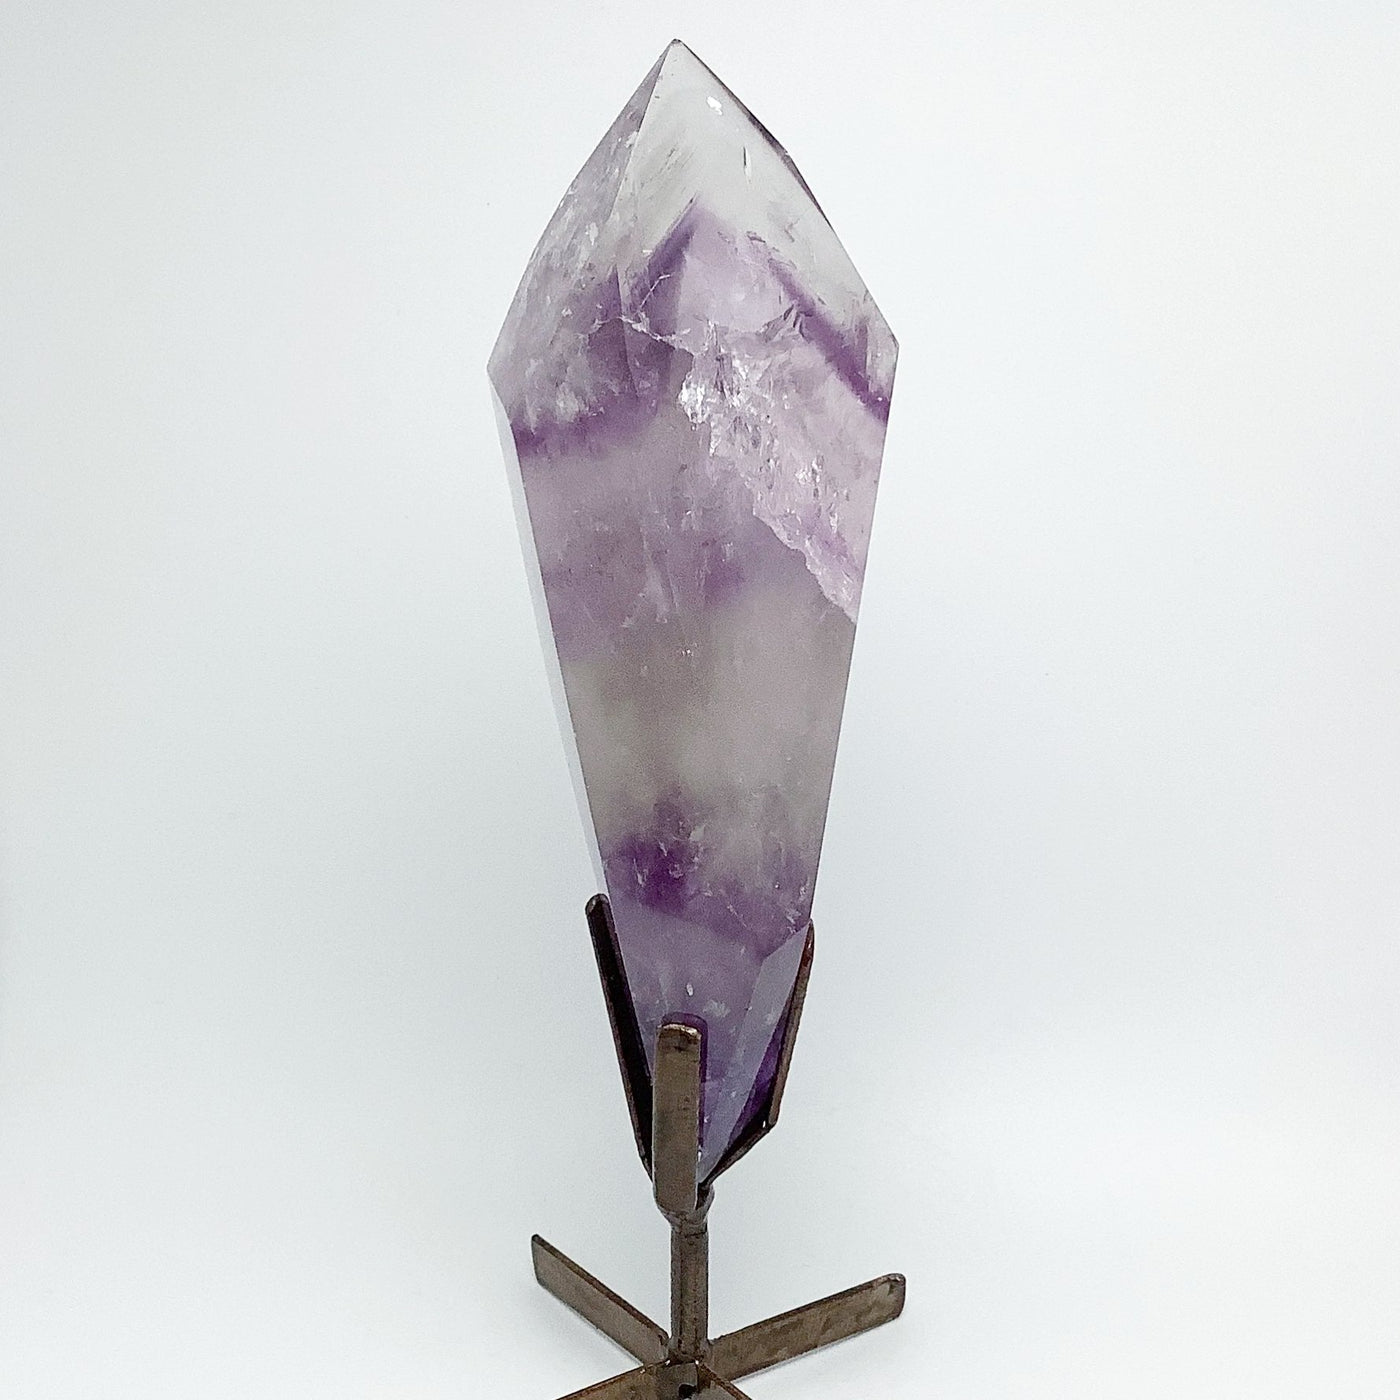 Polished Amethyst Scepter with Display Stand